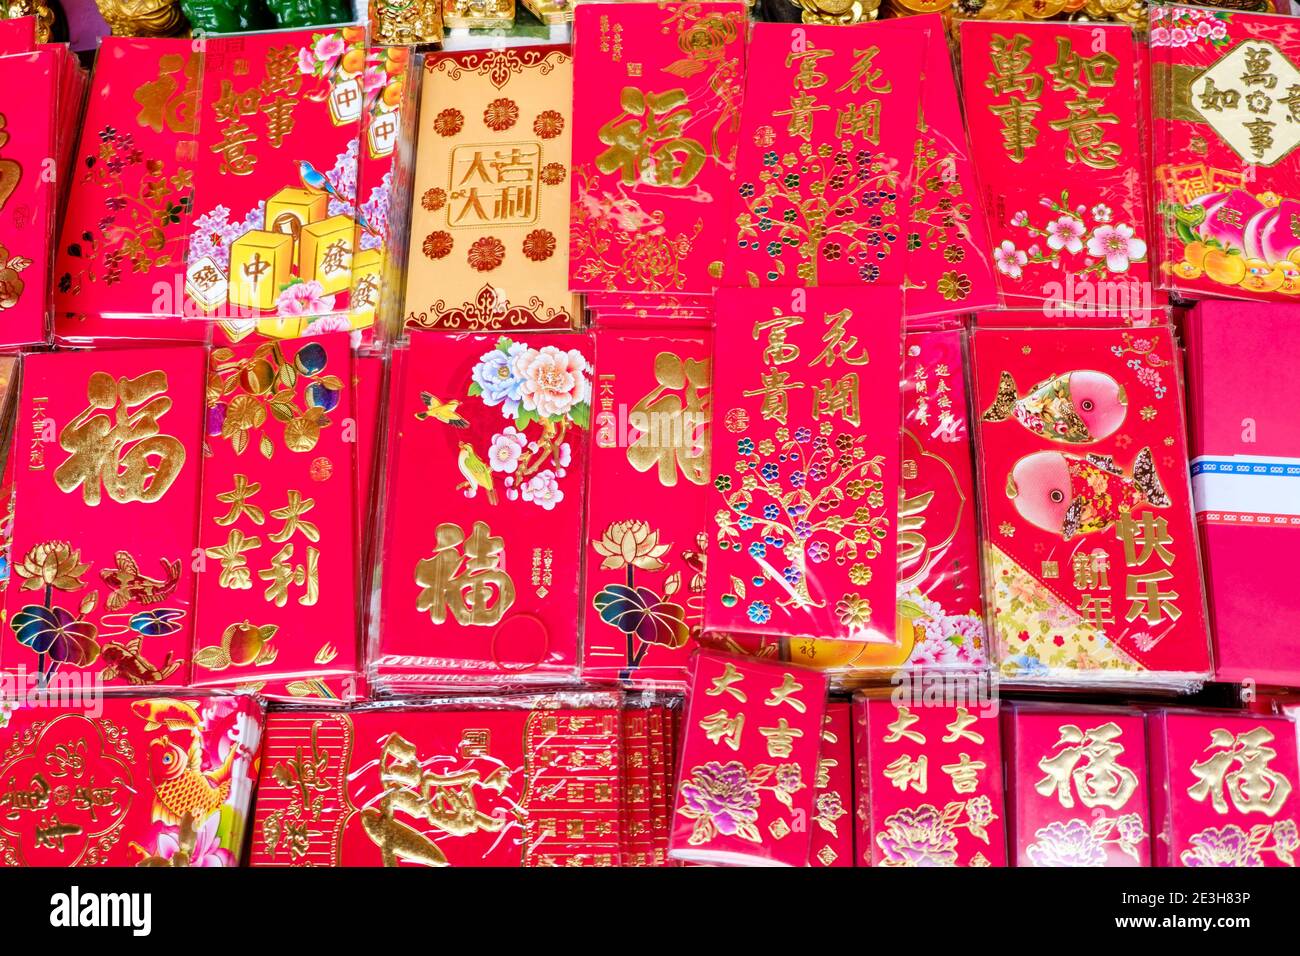 Traditional red envelopes ('hóngbao') given with money inside as gifts during New Year and other occasions in China and many parts of SE Asia. Stock Photo